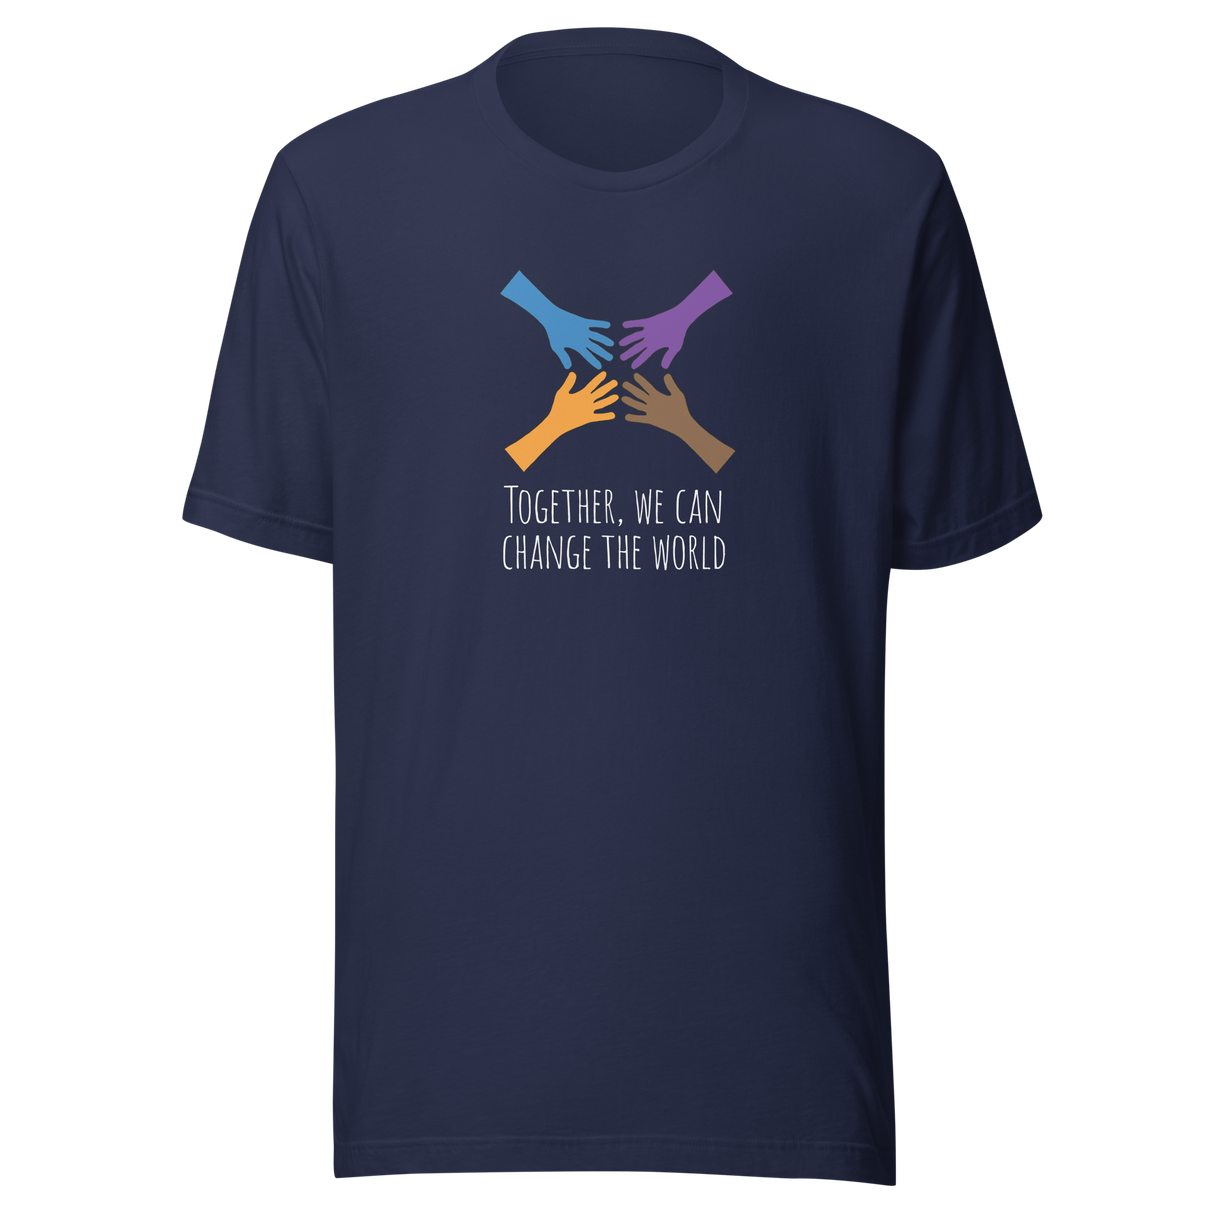 together-we-can-change-the-world-unity-tee-world-t-shirt-change-tee-inspirational-t-shirt-motivational-tee#color_navy